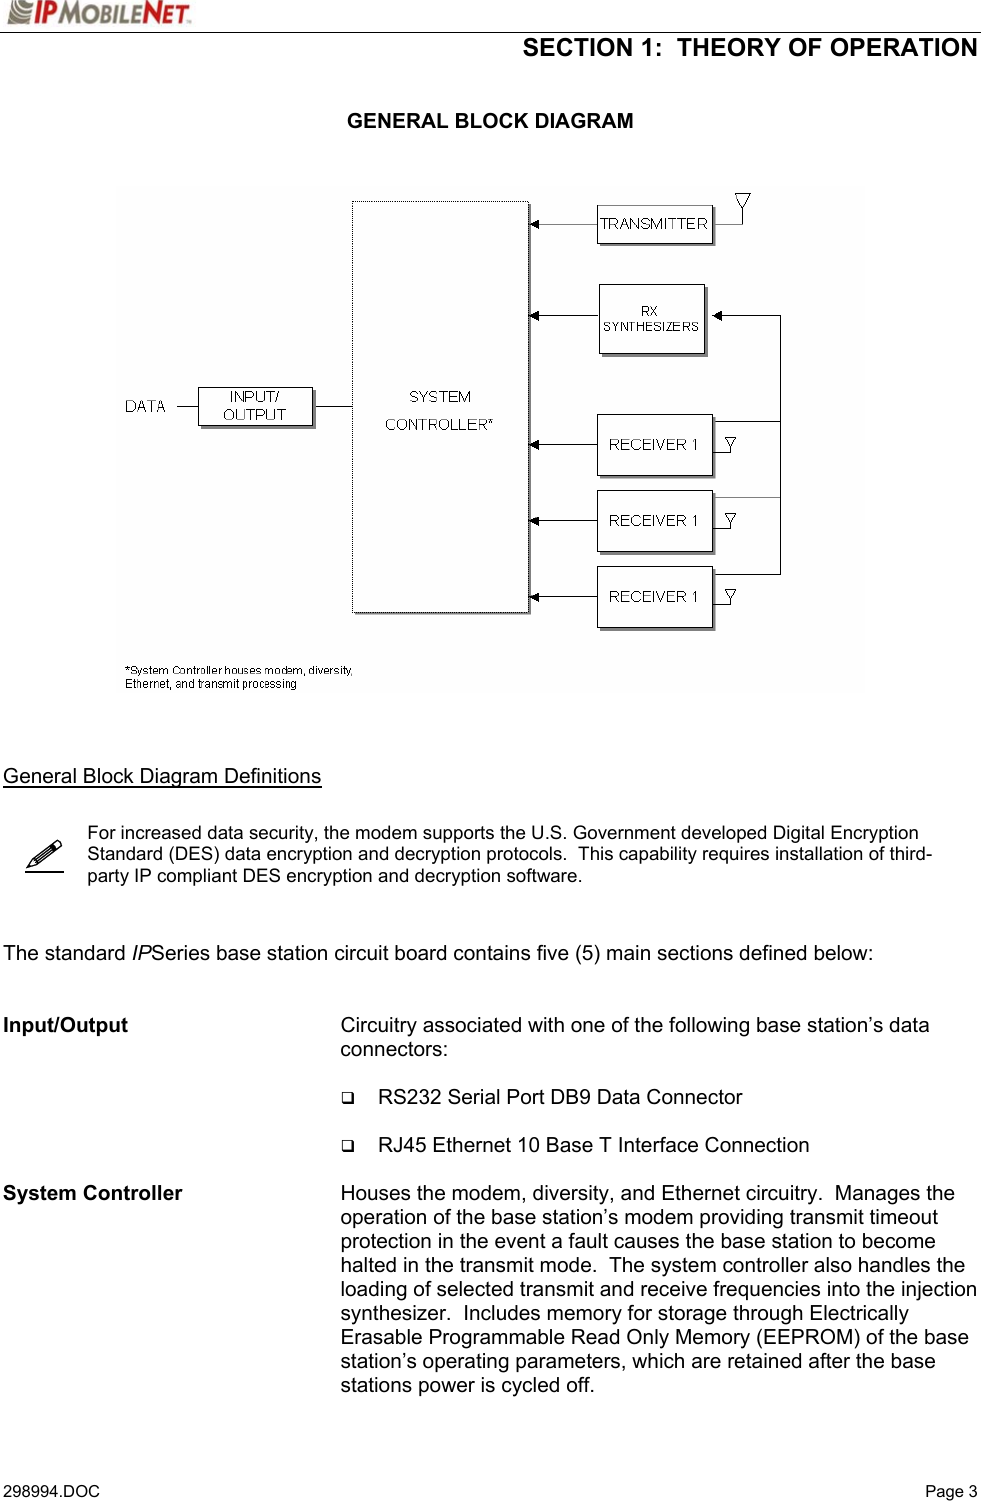  SECTION 1:  THEORY OF OPERATION   298994.DOC   Page 3   GENERAL BLOCK DIAGRAM       General Block Diagram Definitions     For increased data security, the modem supports the U.S. Government developed Digital Encryption Standard (DES) data encryption and decryption protocols.  This capability requires installation of third-party IP compliant DES encryption and decryption software.    The standard IPSeries base station circuit board contains five (5) main sections defined below:   Input/Output    Circuitry associated with one of the following base station’s data connectors:   RS232 Serial Port DB9 Data Connector   RJ45 Ethernet 10 Base T Interface Connection  System Controller    Houses the modem, diversity, and Ethernet circuitry.  Manages the operation of the base station’s modem providing transmit timeout protection in the event a fault causes the base station to become halted in the transmit mode.  The system controller also handles the loading of selected transmit and receive frequencies into the injection synthesizer.  Includes memory for storage through Electrically Erasable Programmable Read Only Memory (EEPROM) of the base station’s operating parameters, which are retained after the base stations power is cycled off.   